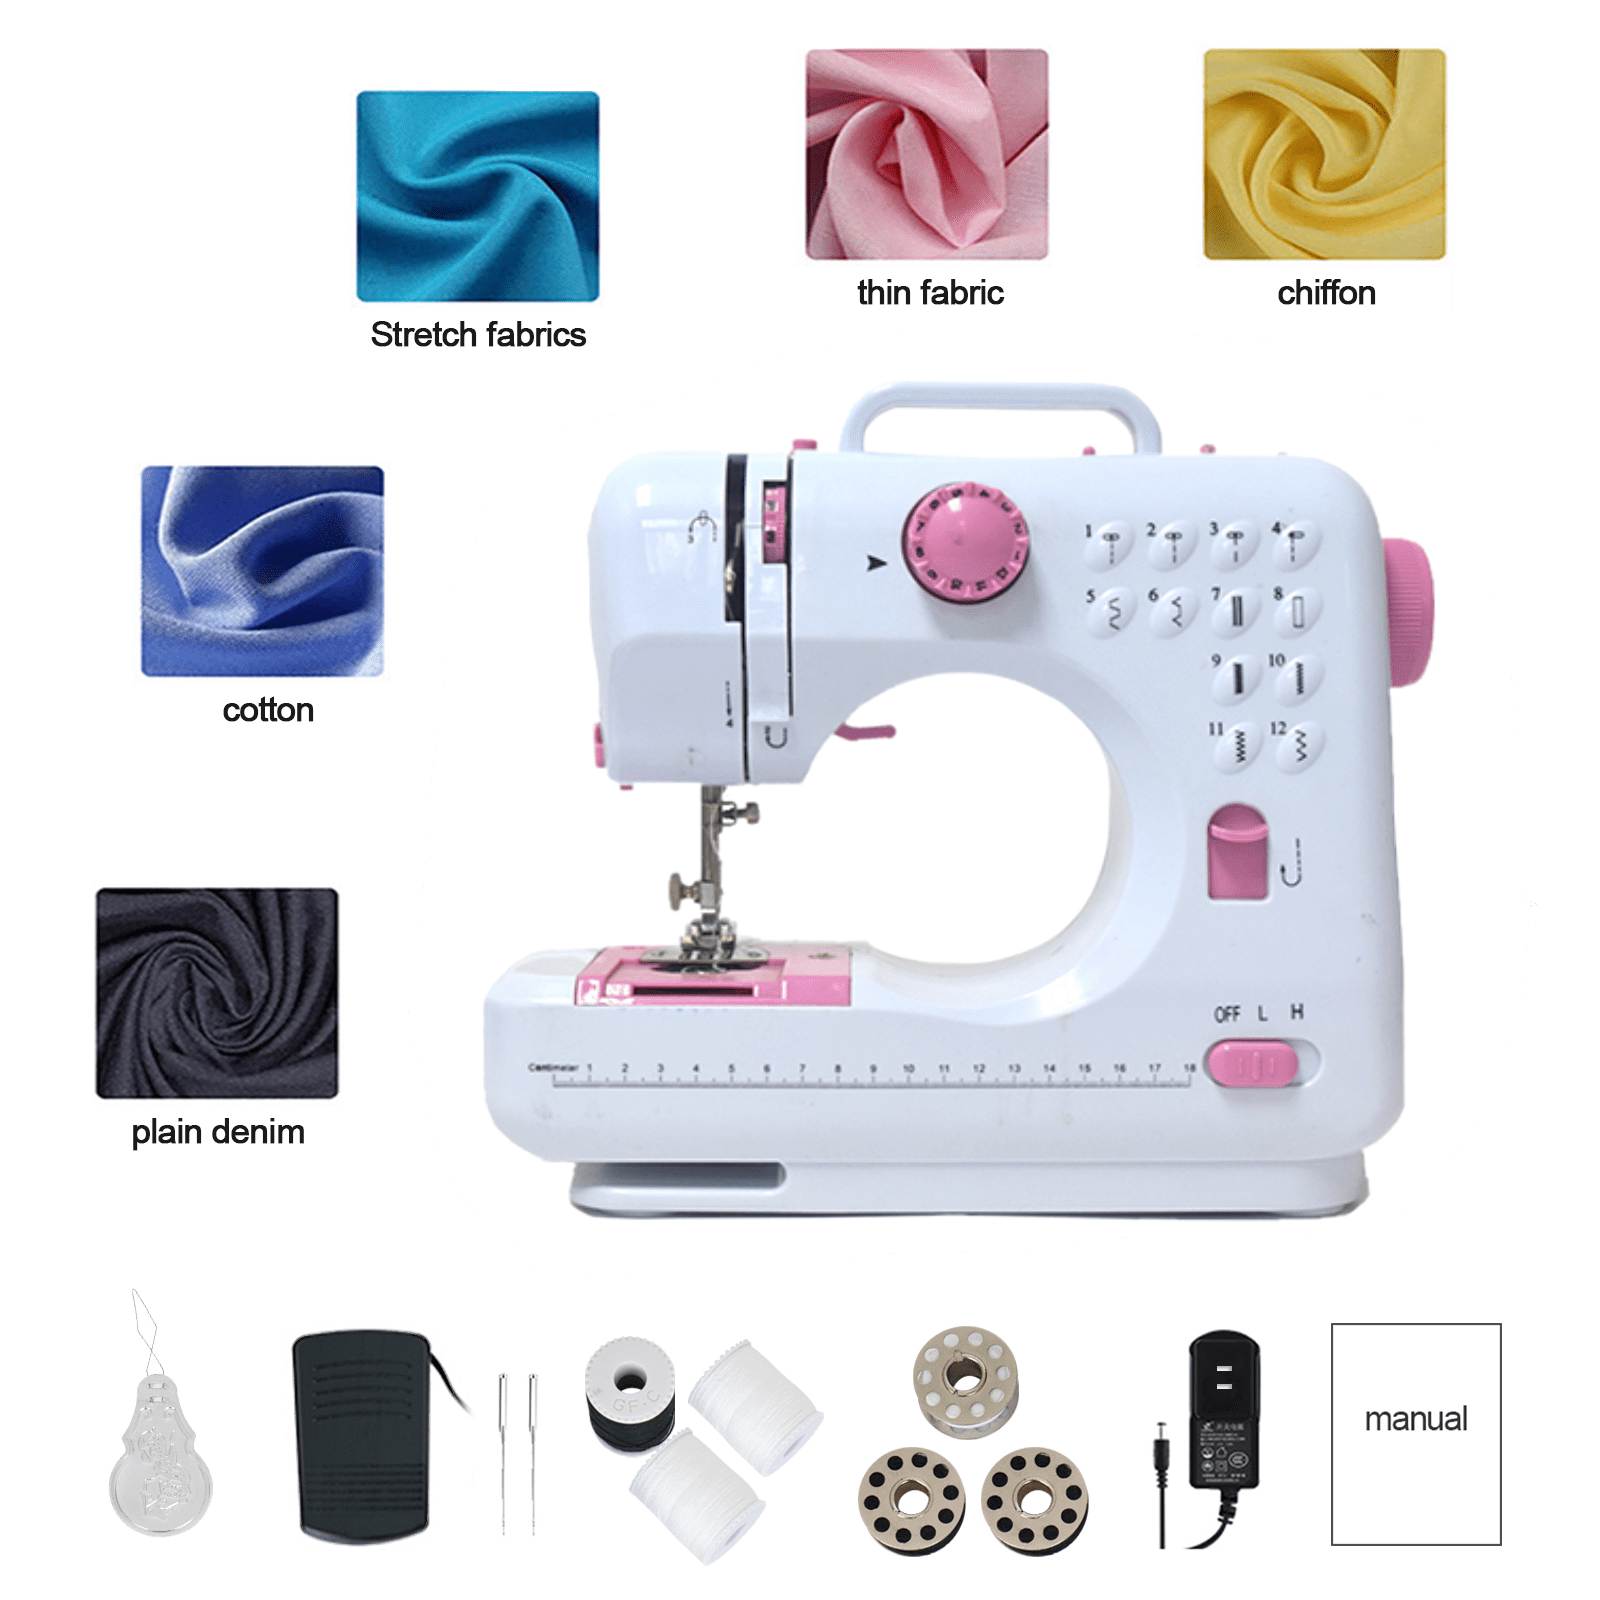  HJWTCQL Mini Sewing Machine for Beginners,Kids Sewing Machines,Small  Sewing Machines with 12 Built-in Stitches and Reverse Sewing,Portable  Sewing Machine for Kids, Suitable For Family Daily : Everything Else